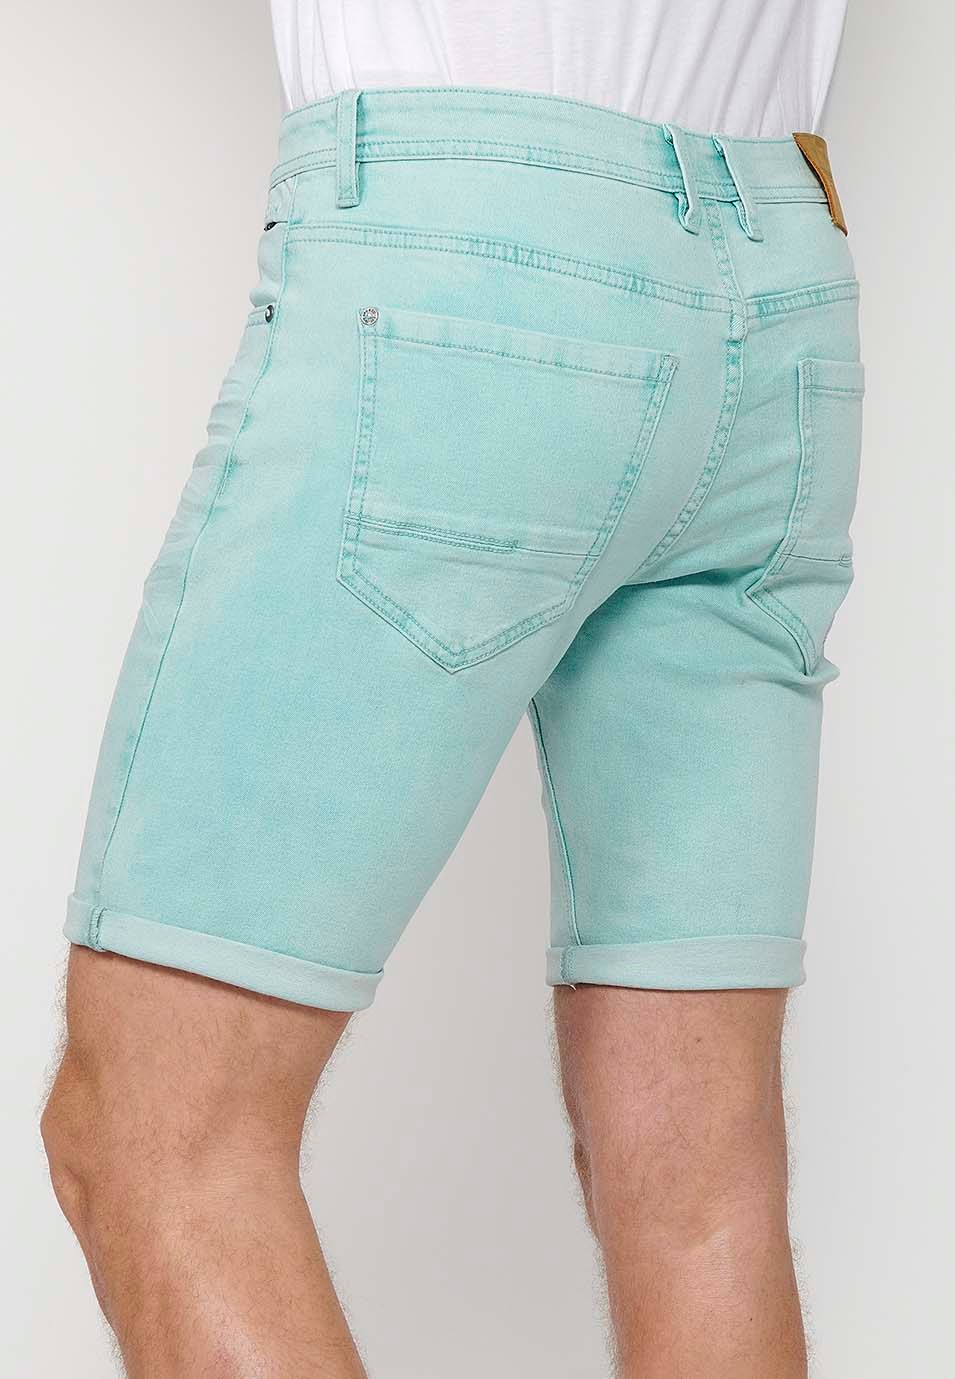 Shorts with turn-up closure with front zipper and button closure and five pockets, one blue pocket pocket for Men 8